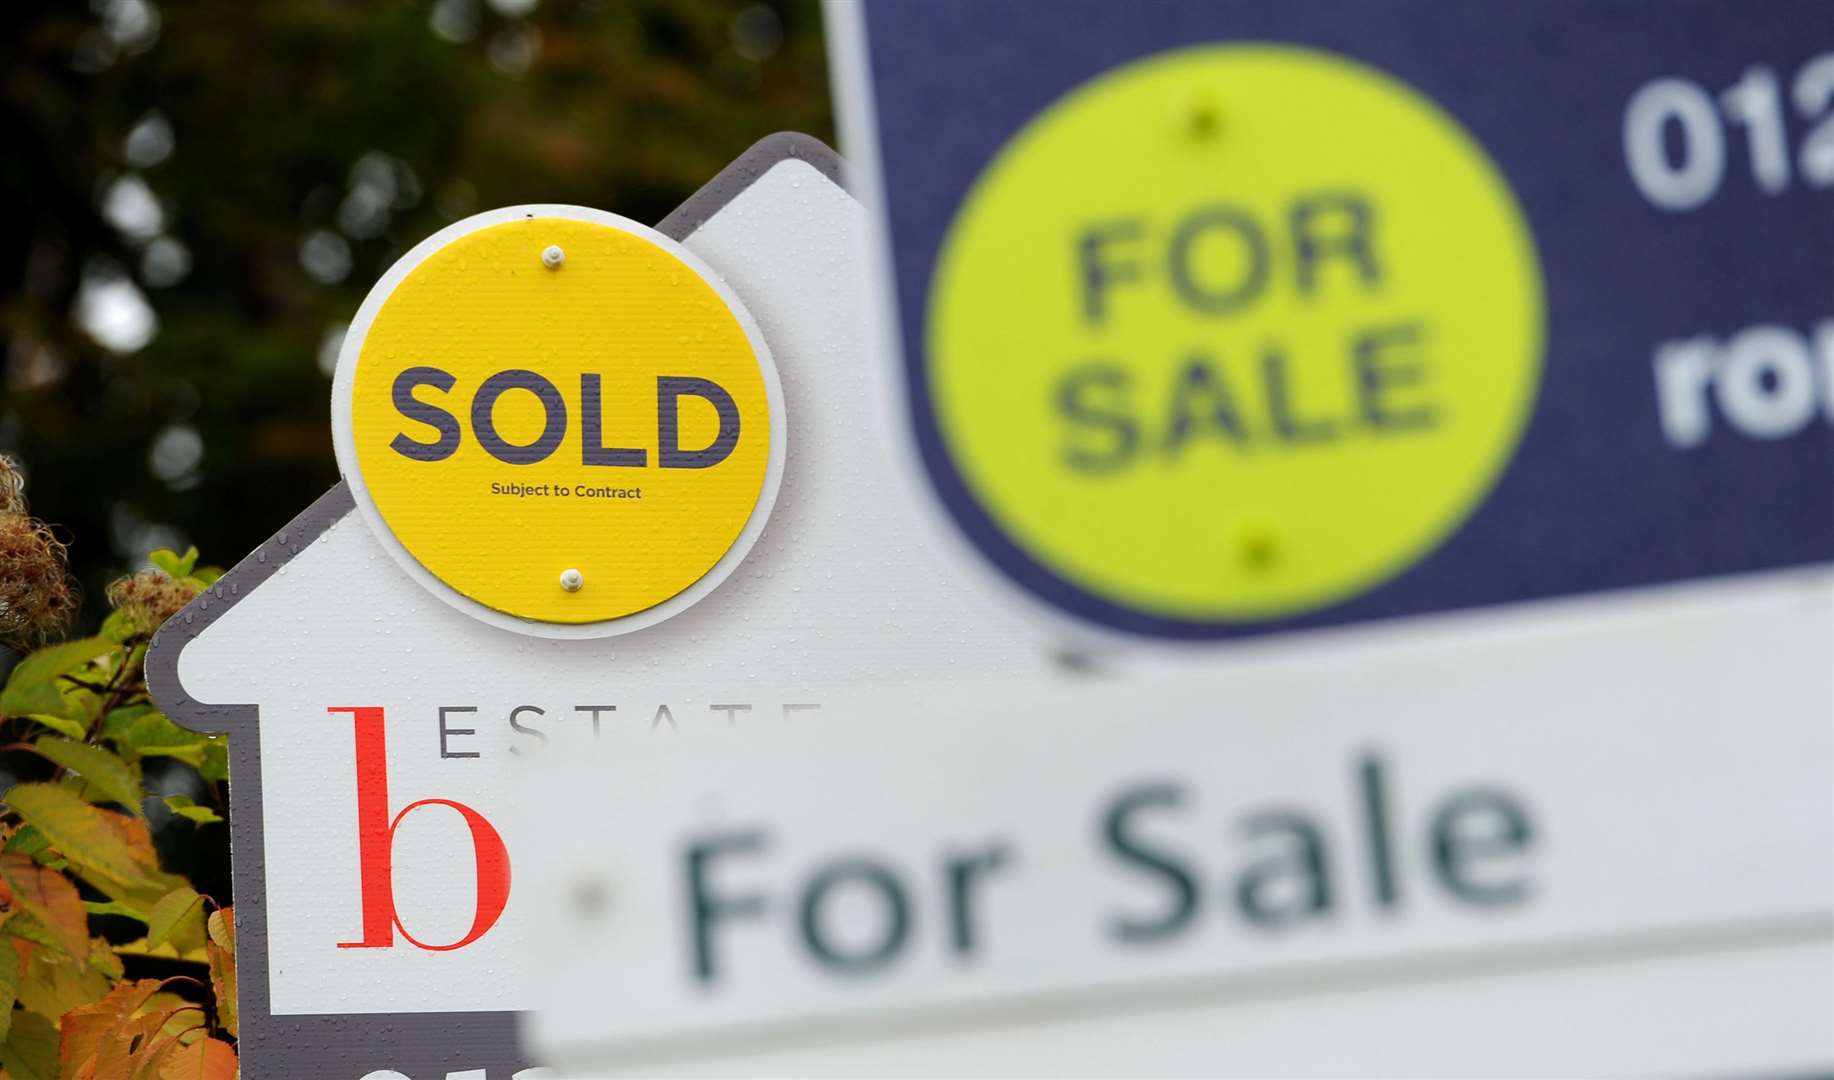 House prices in two Kent towns are set to rise way ahead of the UK average according to the report